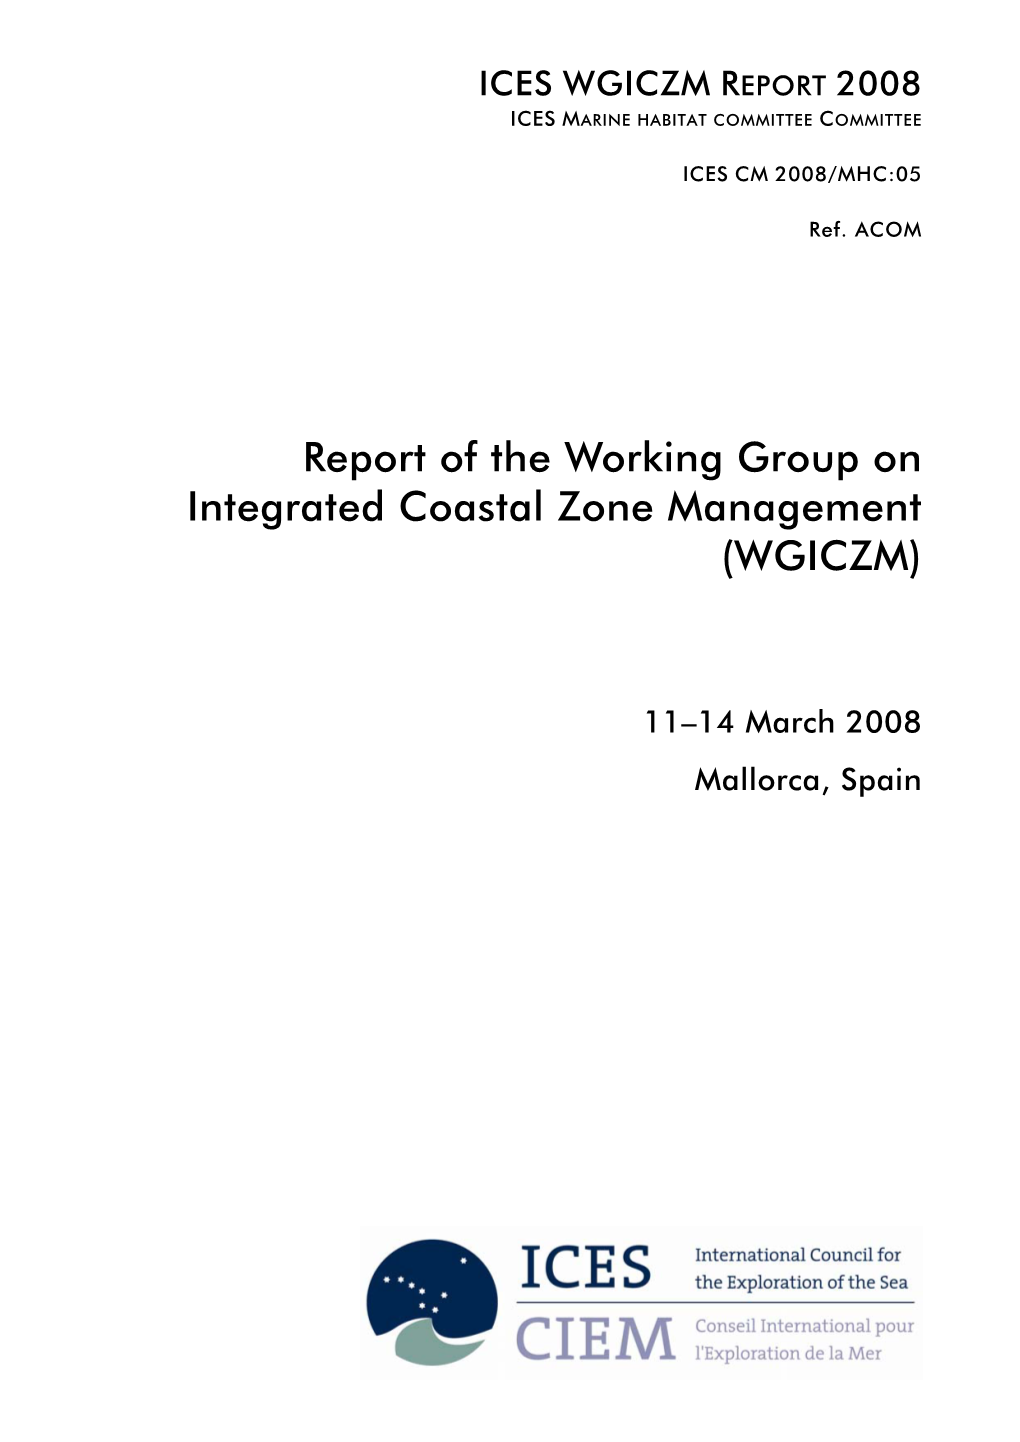 Report of the Working Group on Integrated Coastal Zone Management (WGICZM)